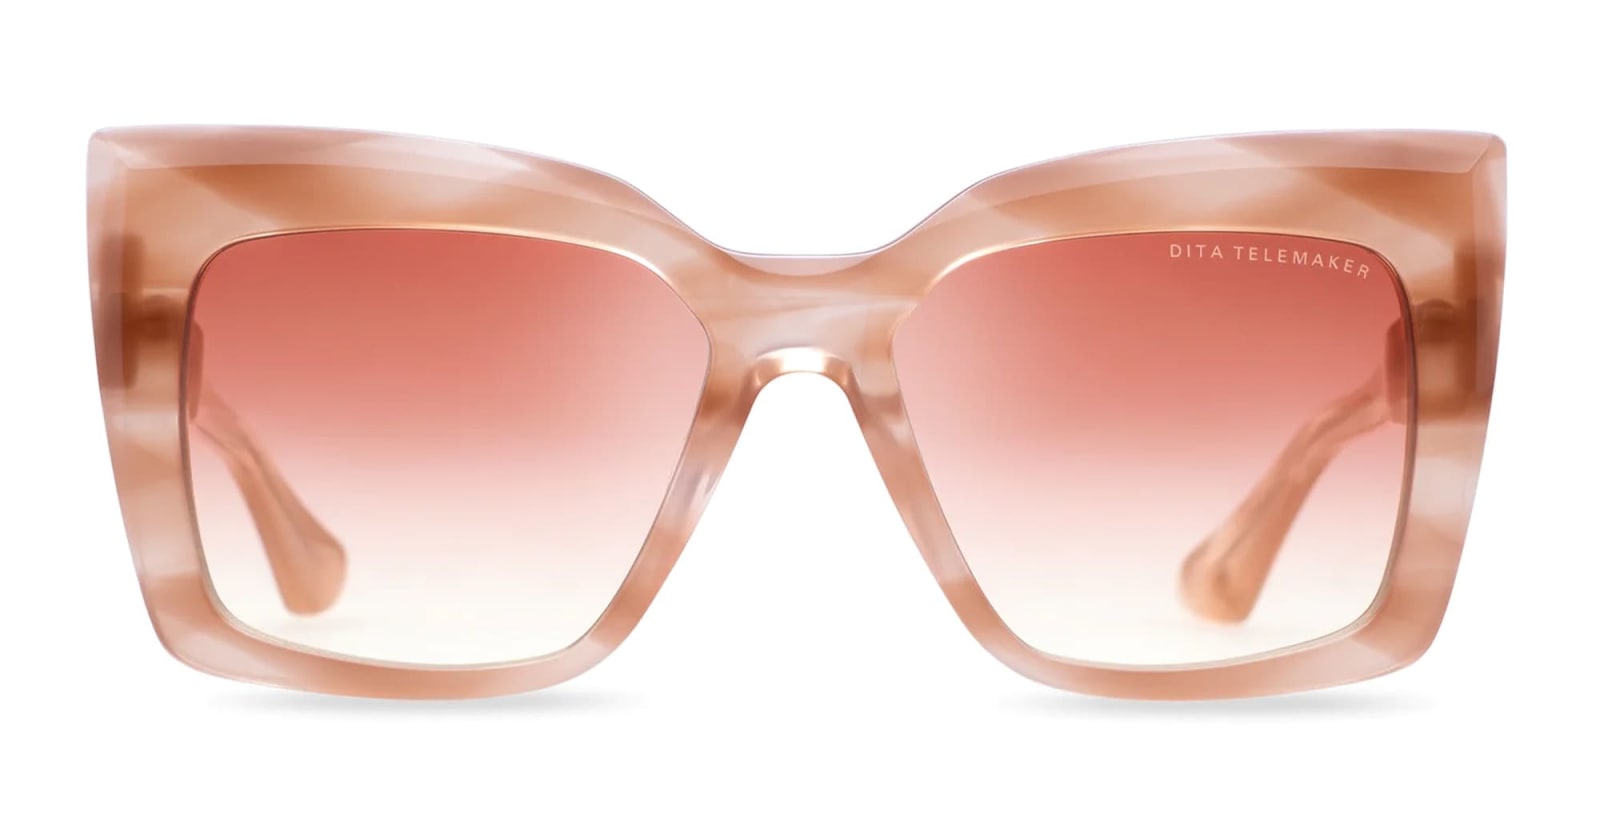 Telemaker - Dusty Pink Sunglasses